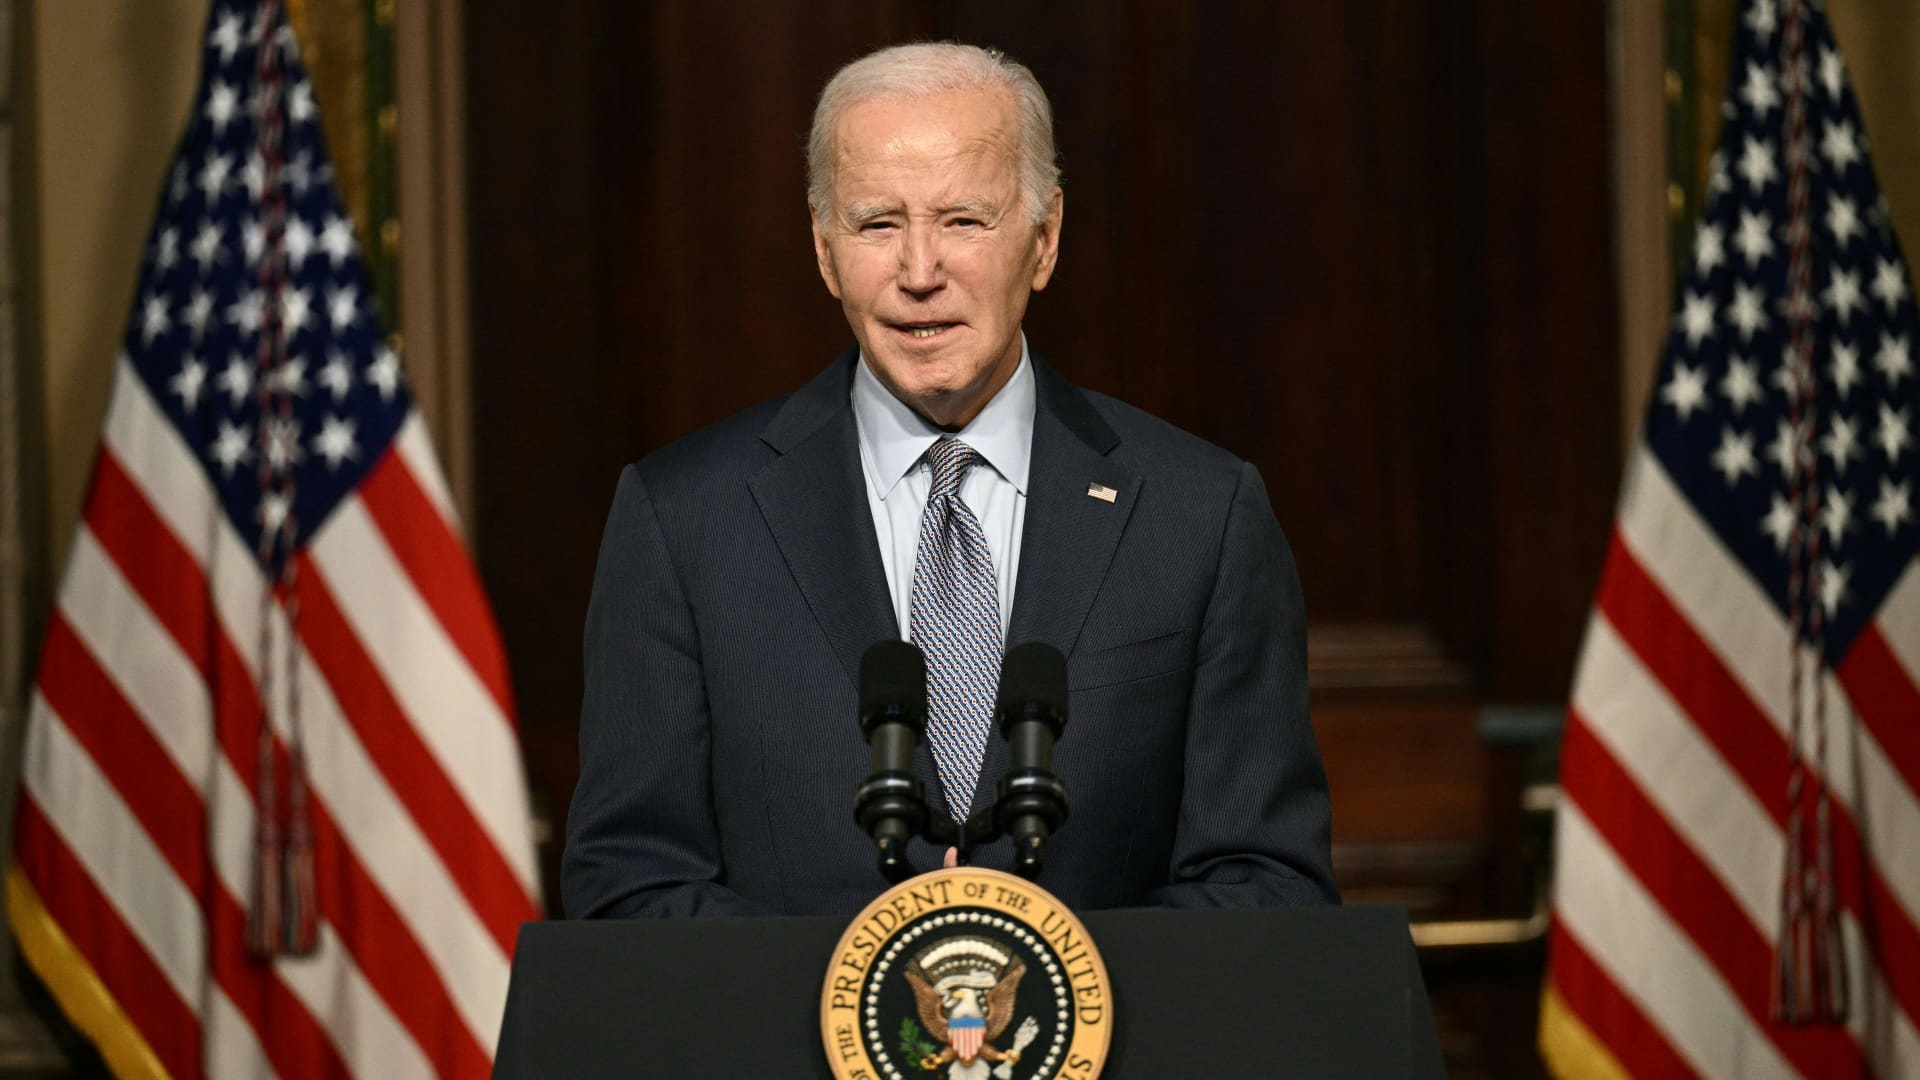 Biden issues warning to longtime Hamas ally Iran, reiterates support for Israel and Netanyahu